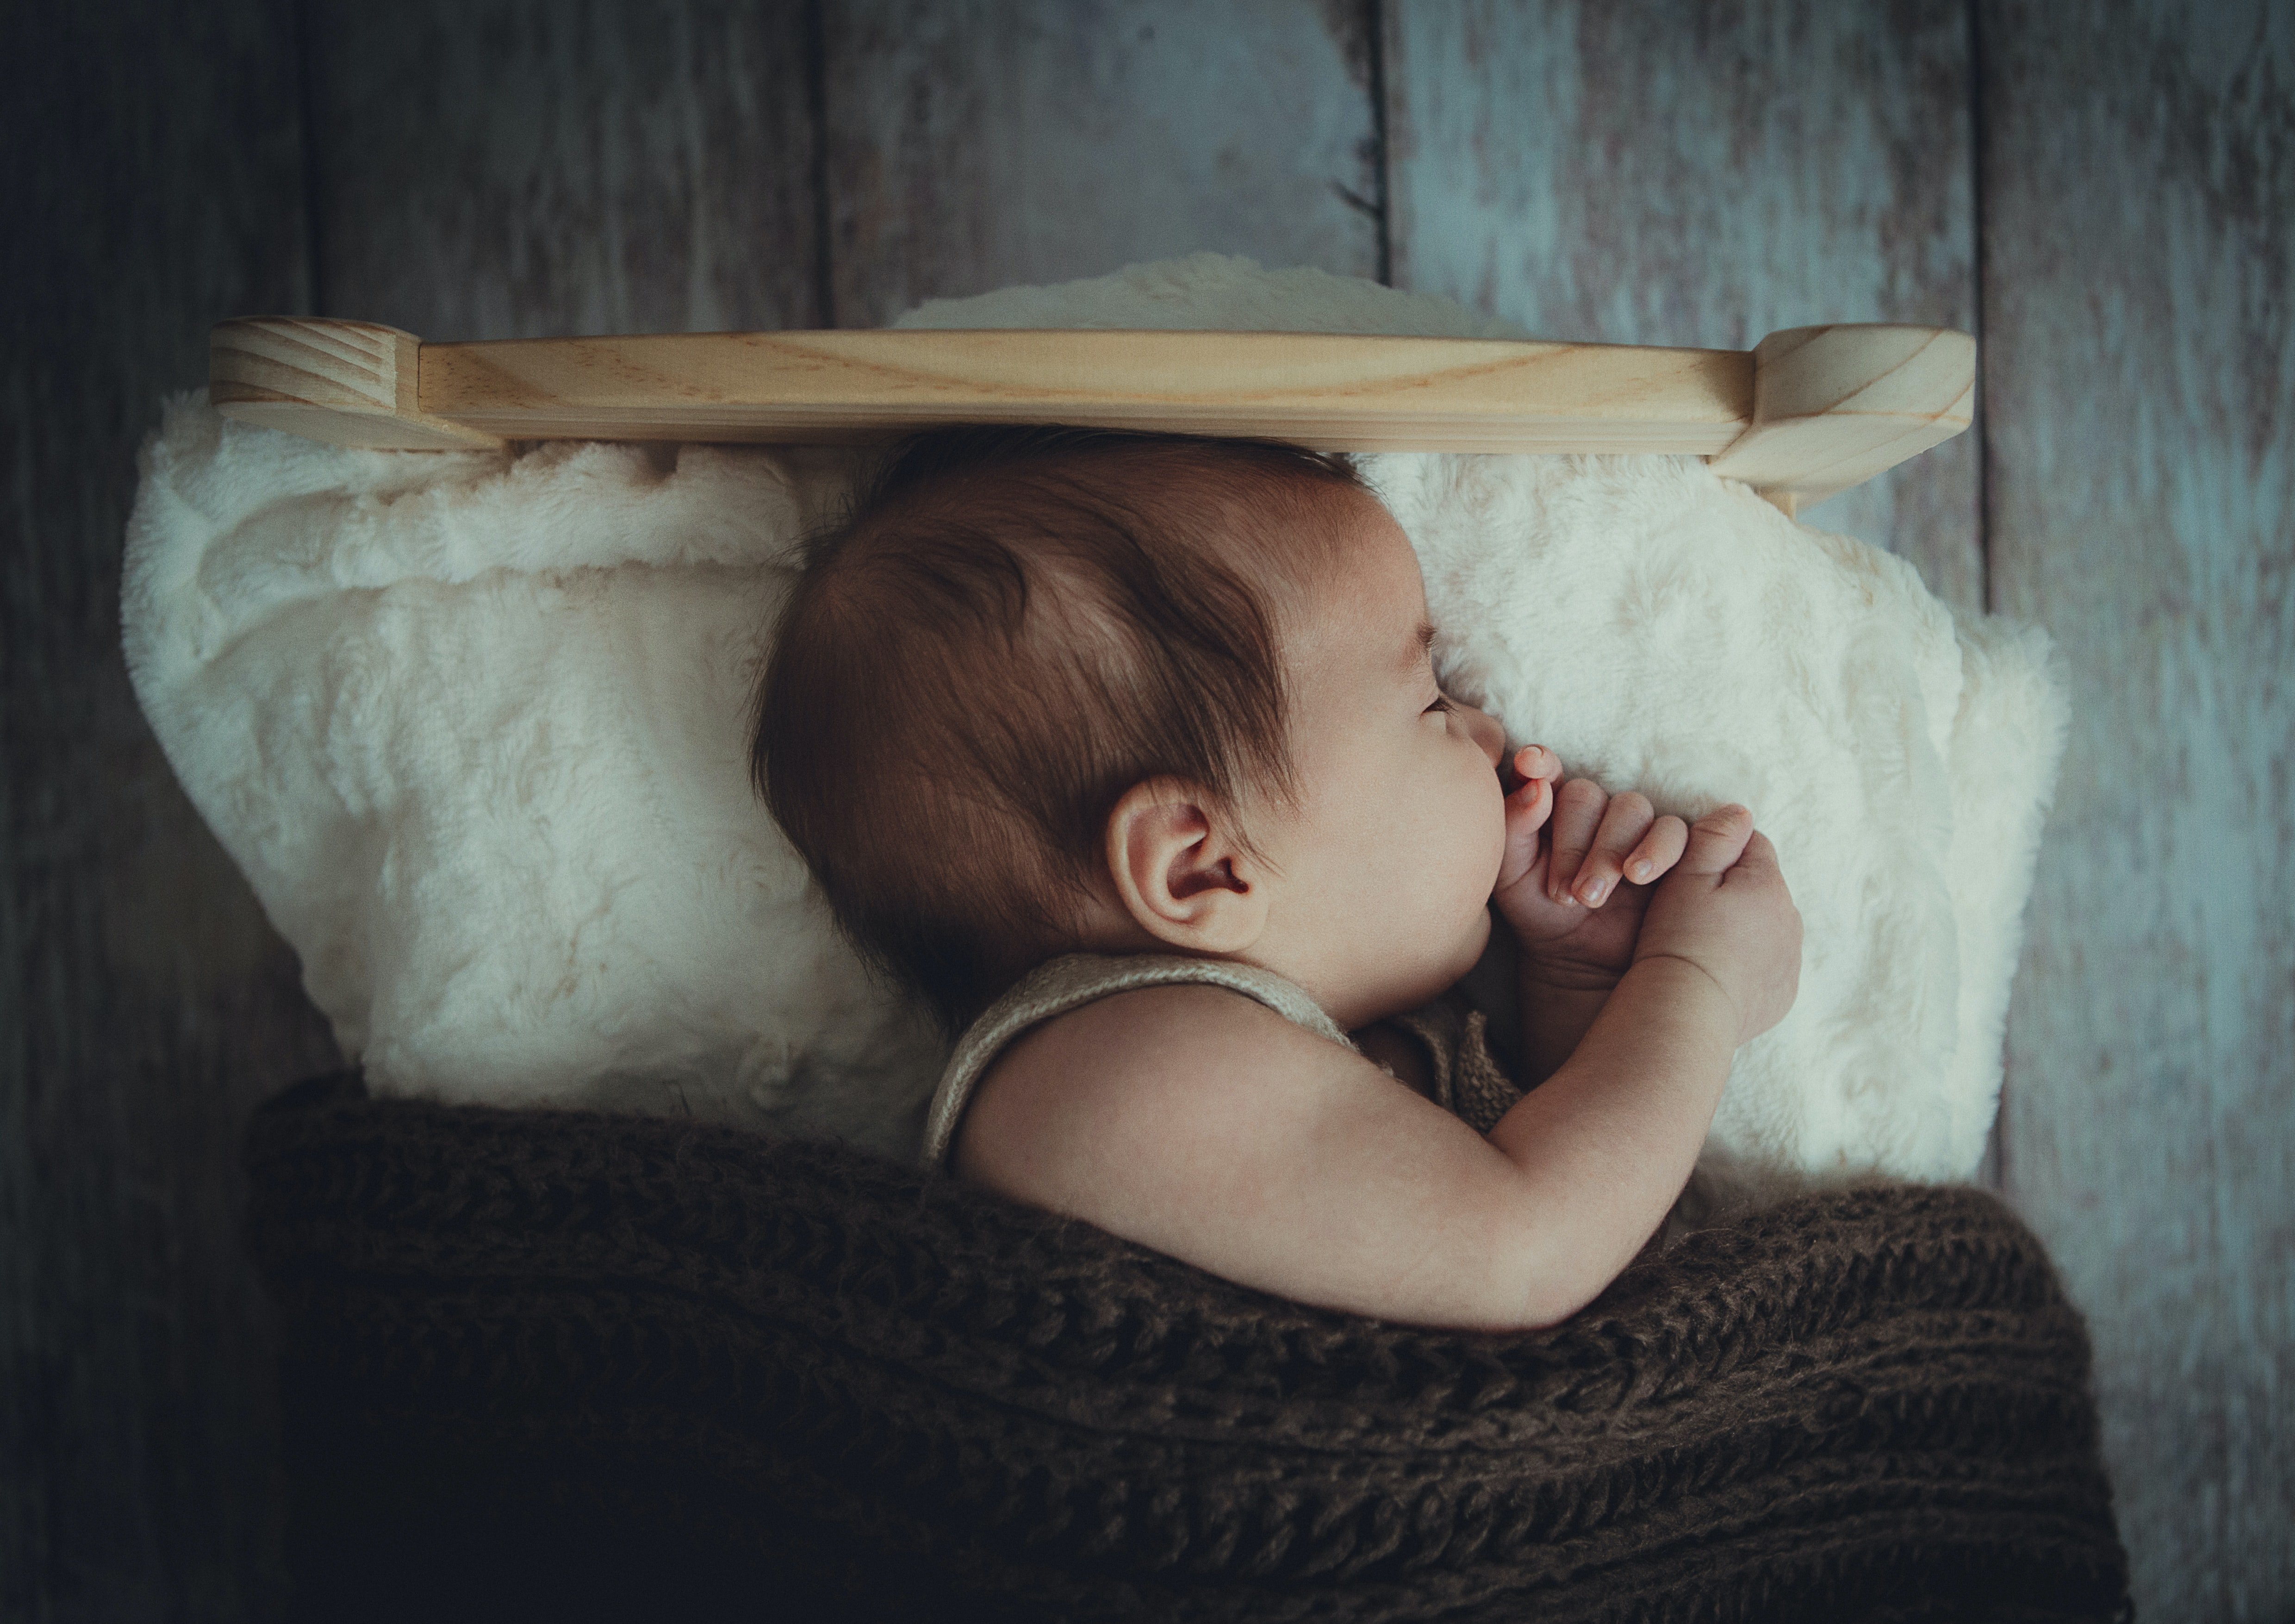 Richard was abandoned in an orphanage when he was just a baby. | Source: Unsplash